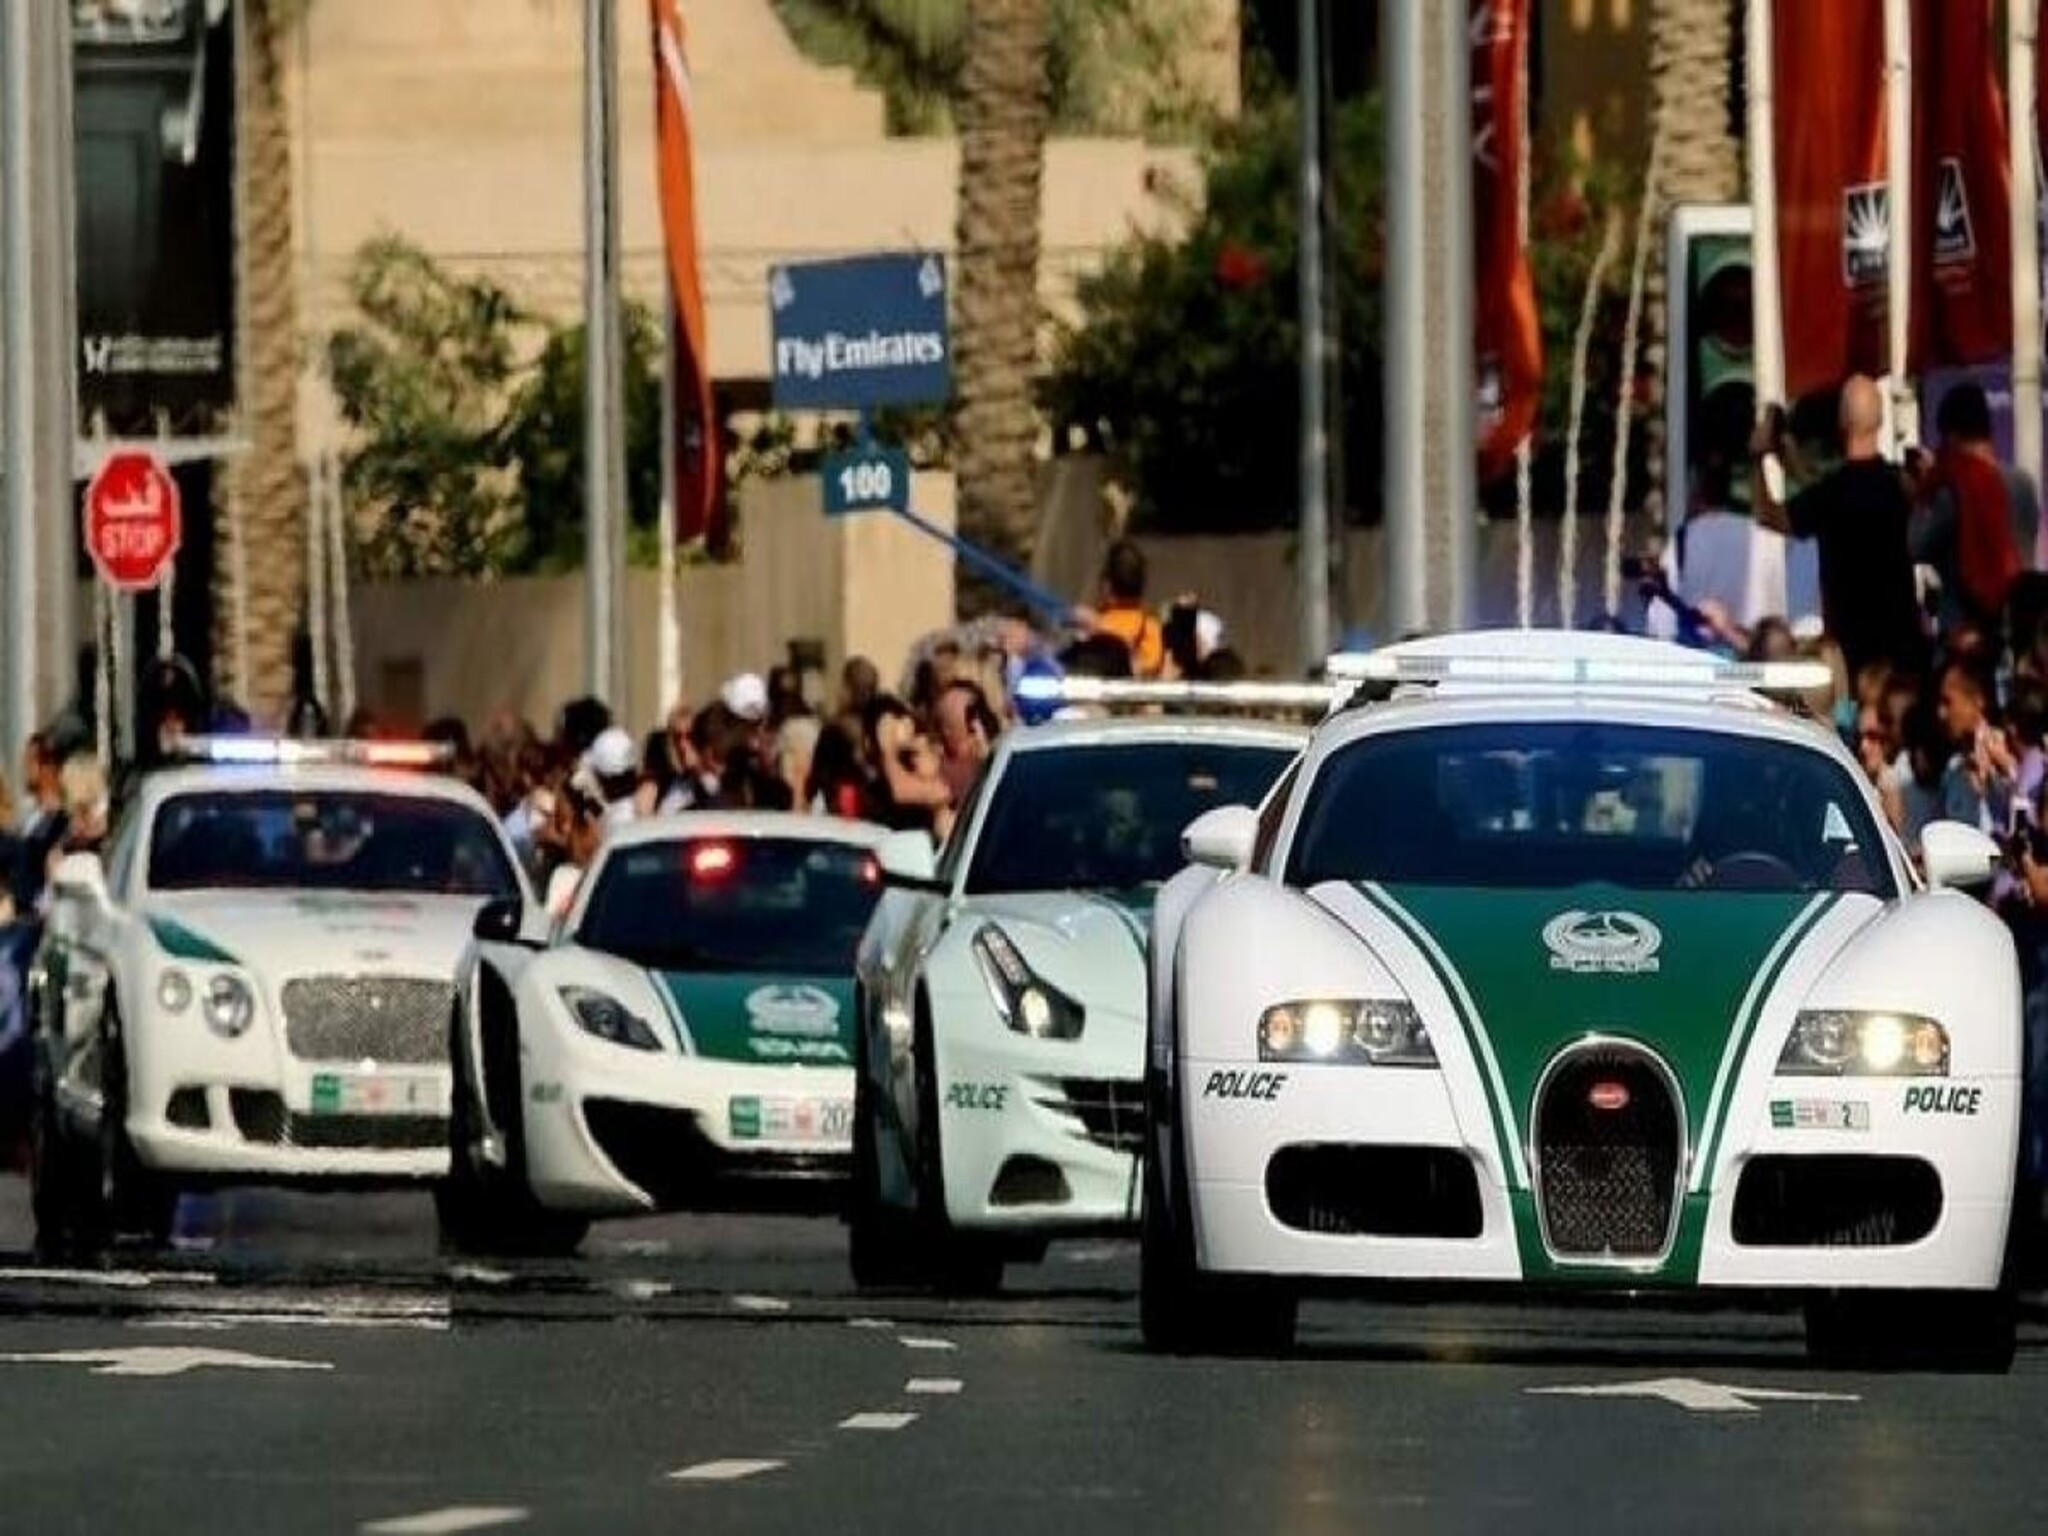 Due to certain restrictions, Dubai Police announced the arrest of 967 residents